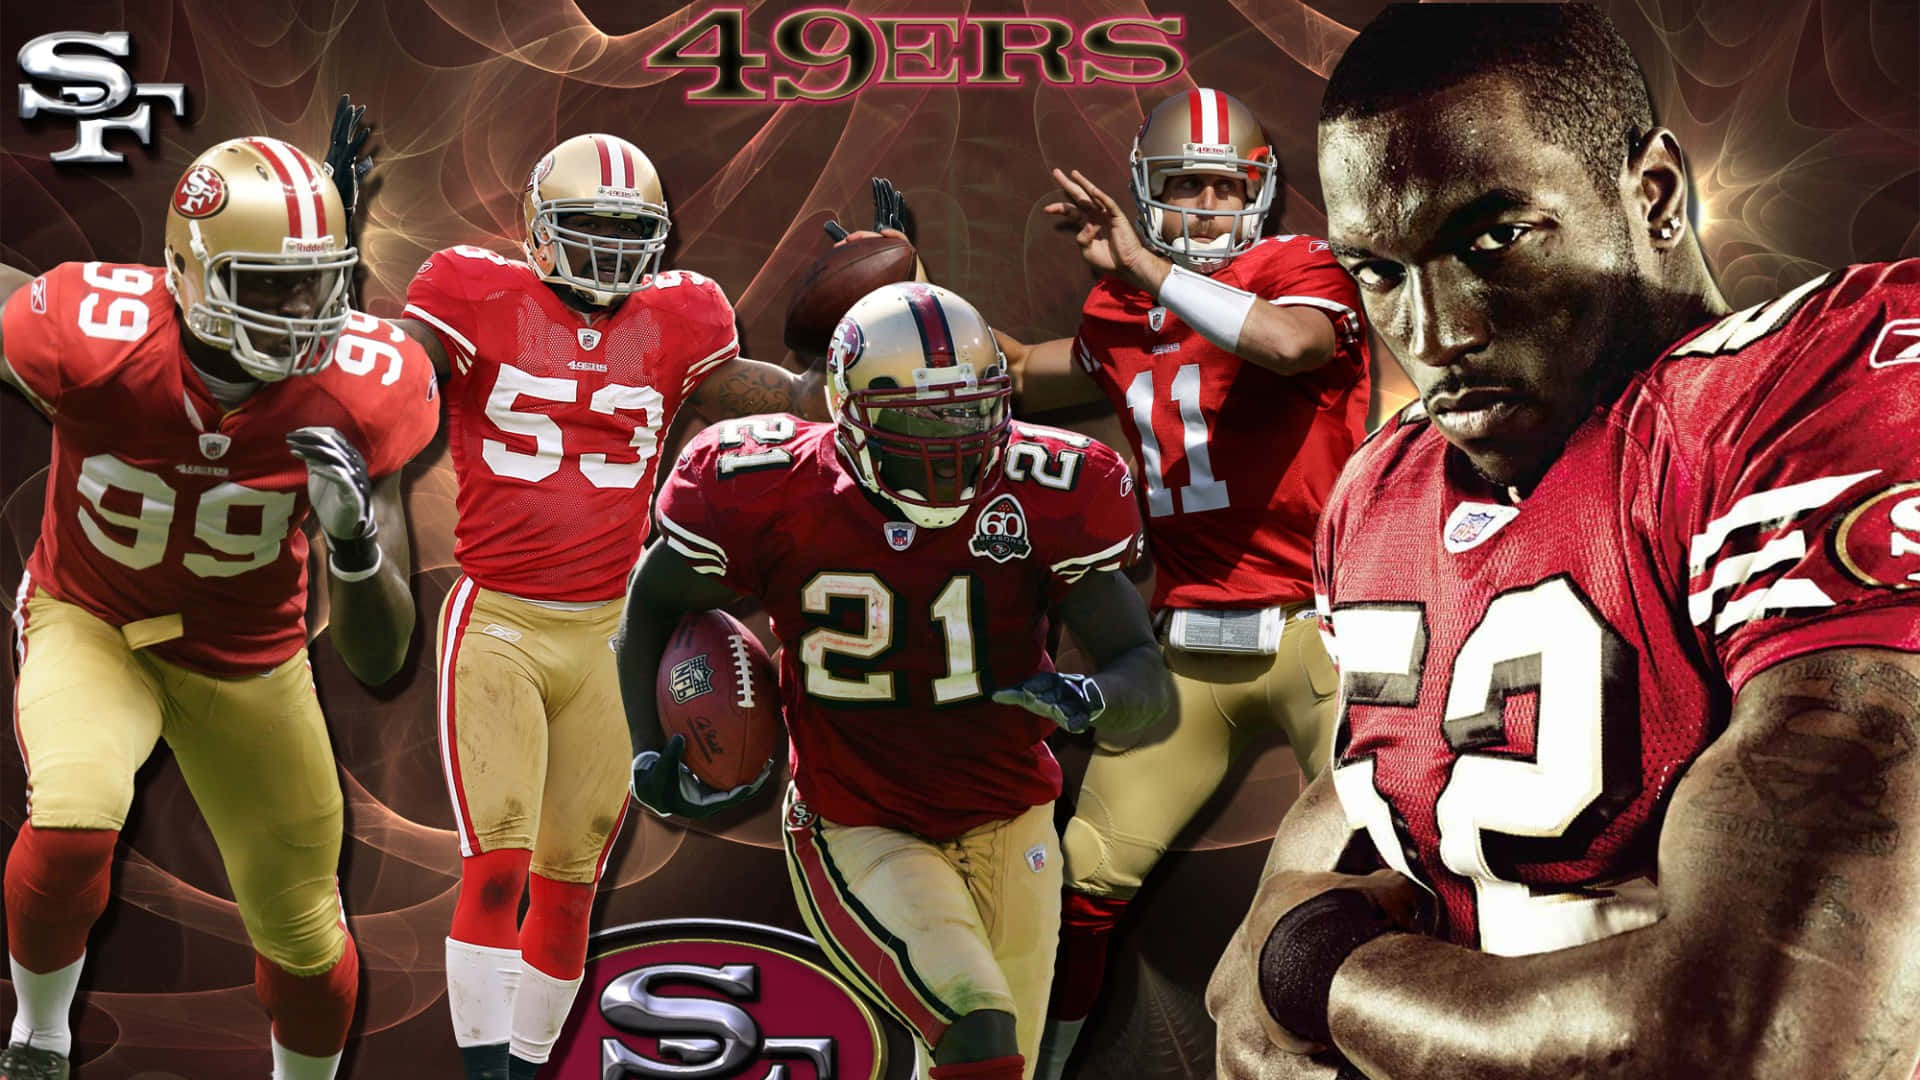 San Francisco 49ers – Built on Family and Pride